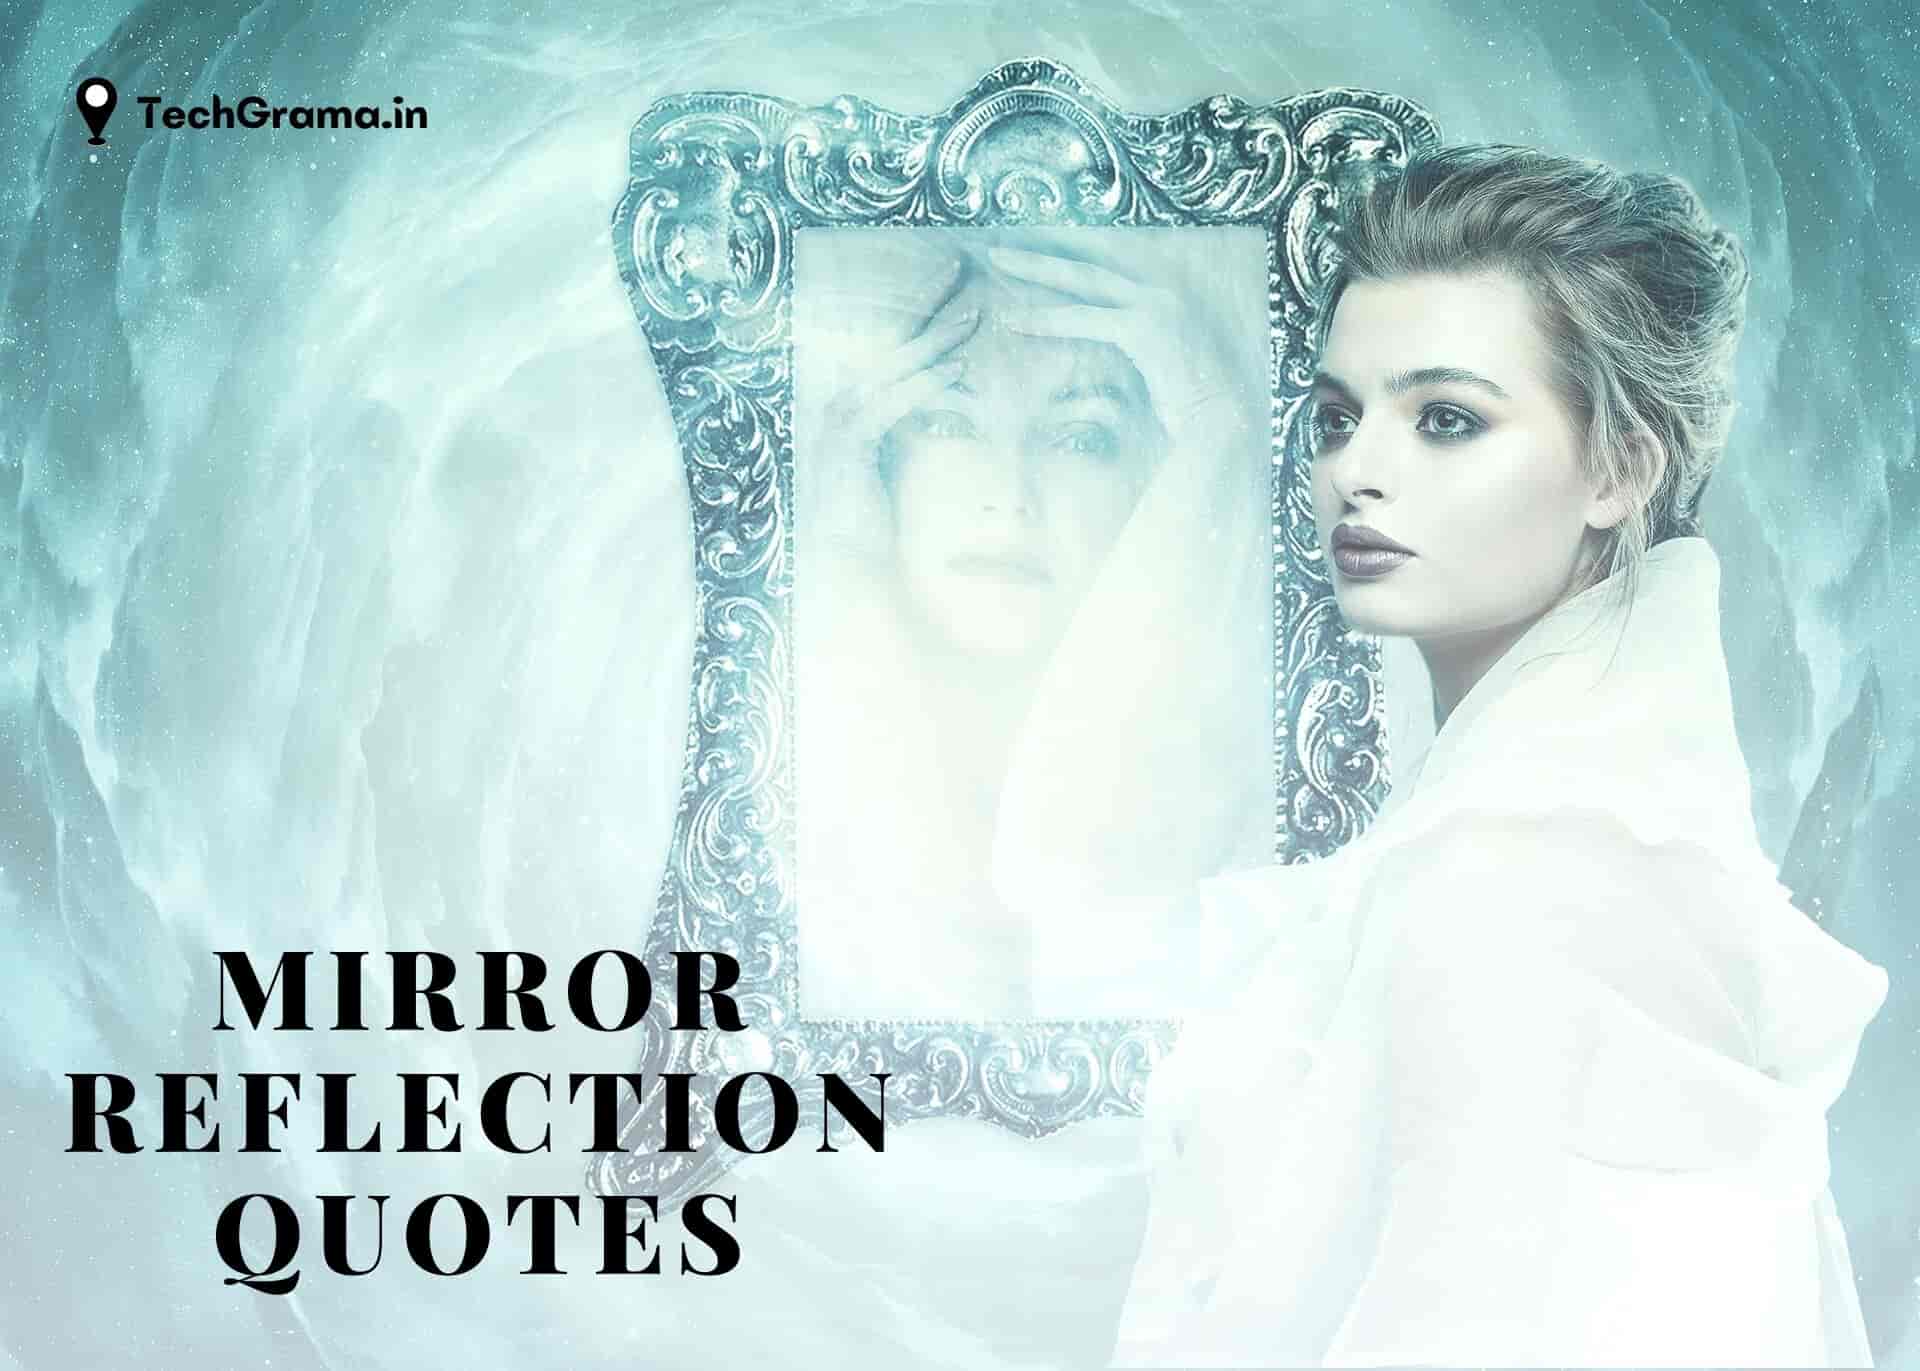 Best Mirror Quotes, Mirror Reflection Quotes, Quotes on Mirror Reflection, Quotes on Mirror Selfie, Mirror Quotes About Love, Broken Mirror Quotes, Mirror Quotes For Instagram, Mirror Quotes About Life, Motivational Mirror Quotes, Mirror Yourself Quotes, Smile in The Mirror Quotes, Mirror Quotes in English.